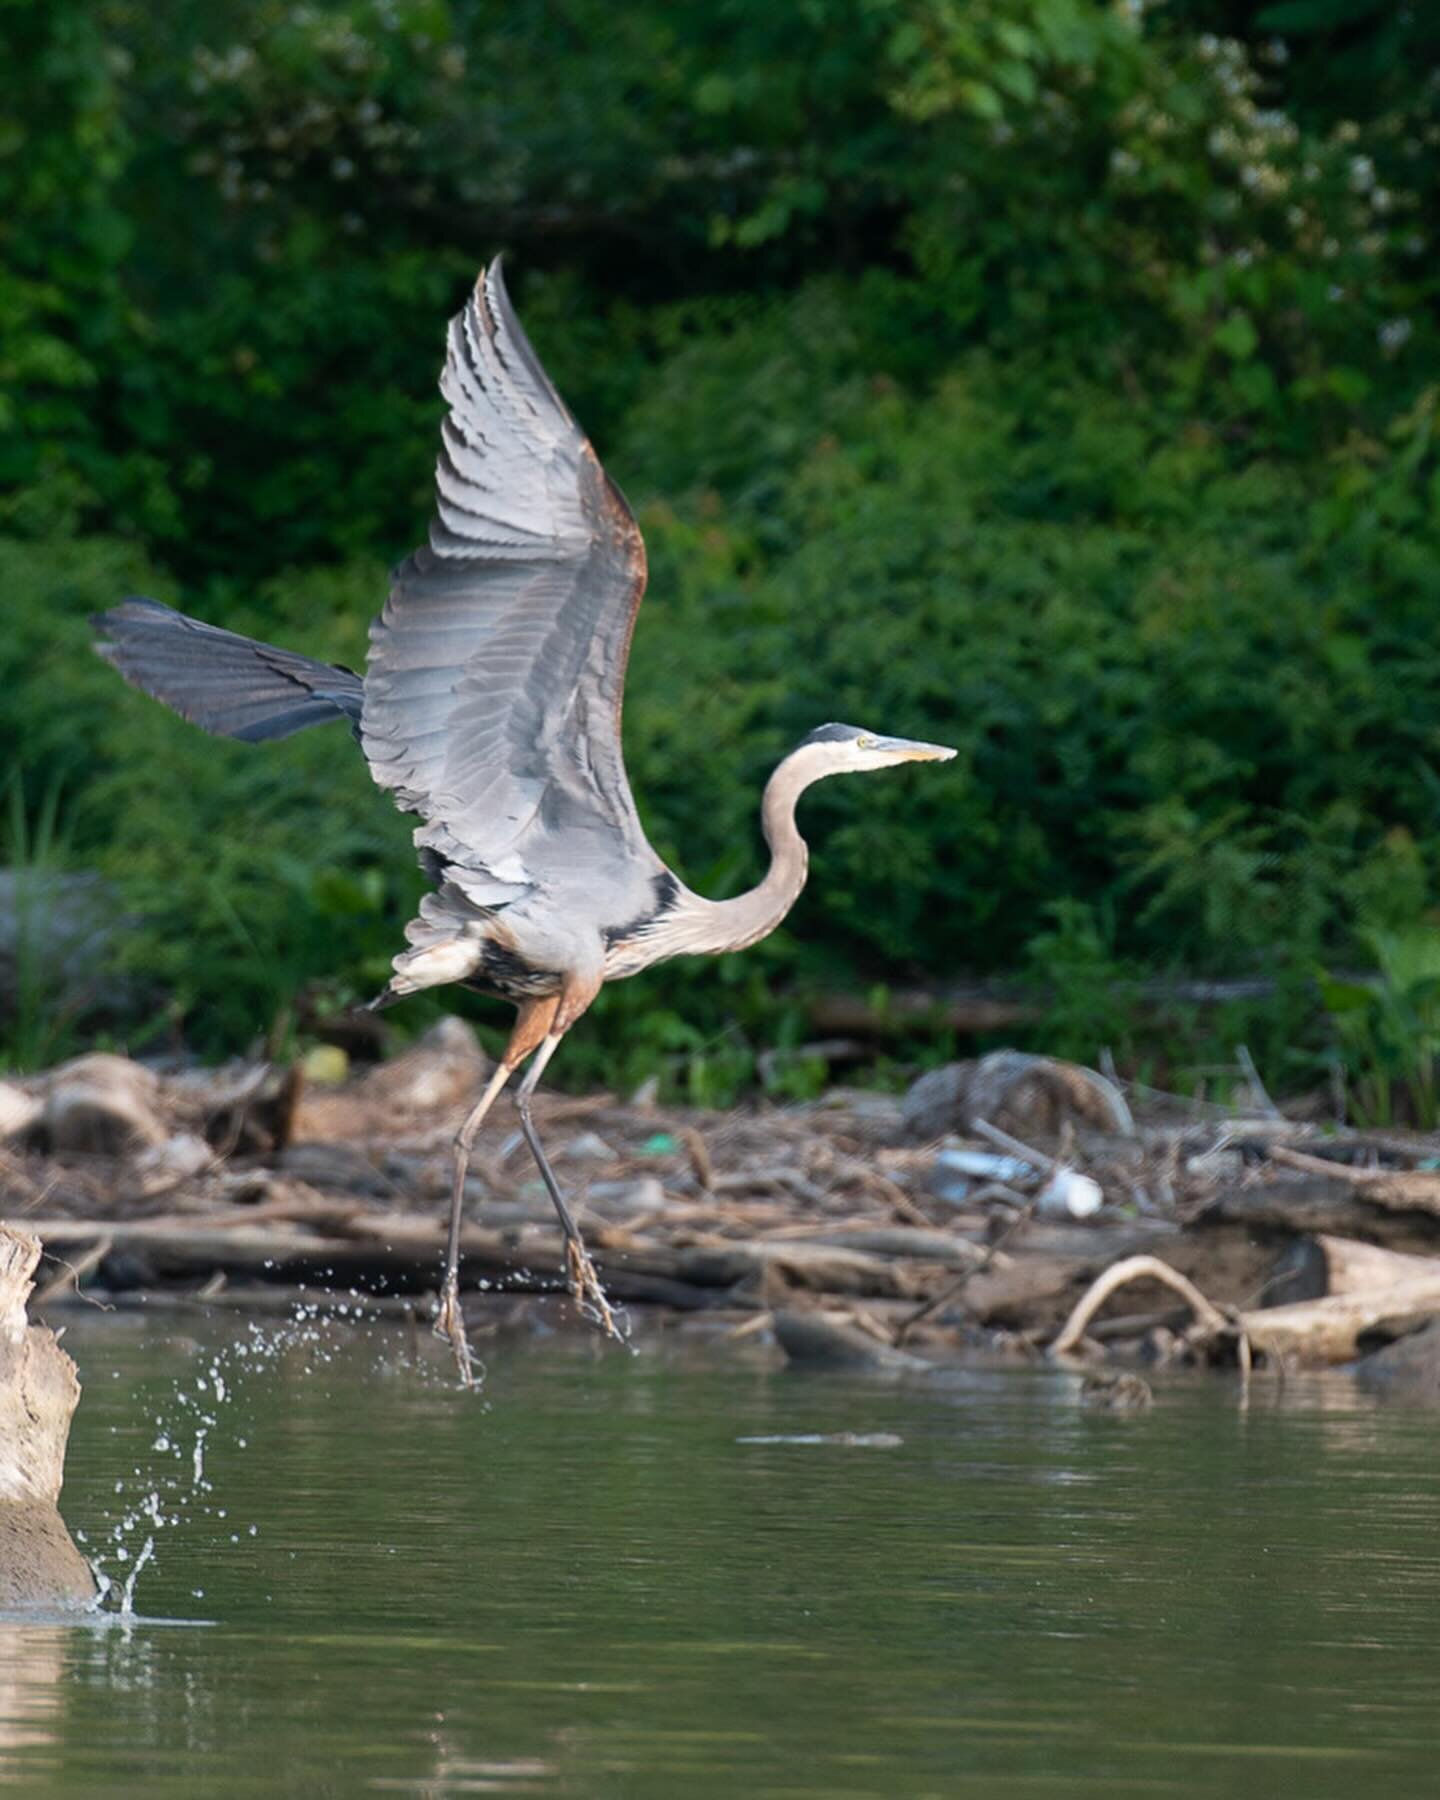 Set to discover some wildlife? 🔍 This spring, the Ohio River will transform into a bustling flyway for countless birds, a spectacle of beauty and biodiversity. Get your binoculars ready! 🐦🦆

📷 @susangriffinward, @joewolek, John Nation
#ohioriverw